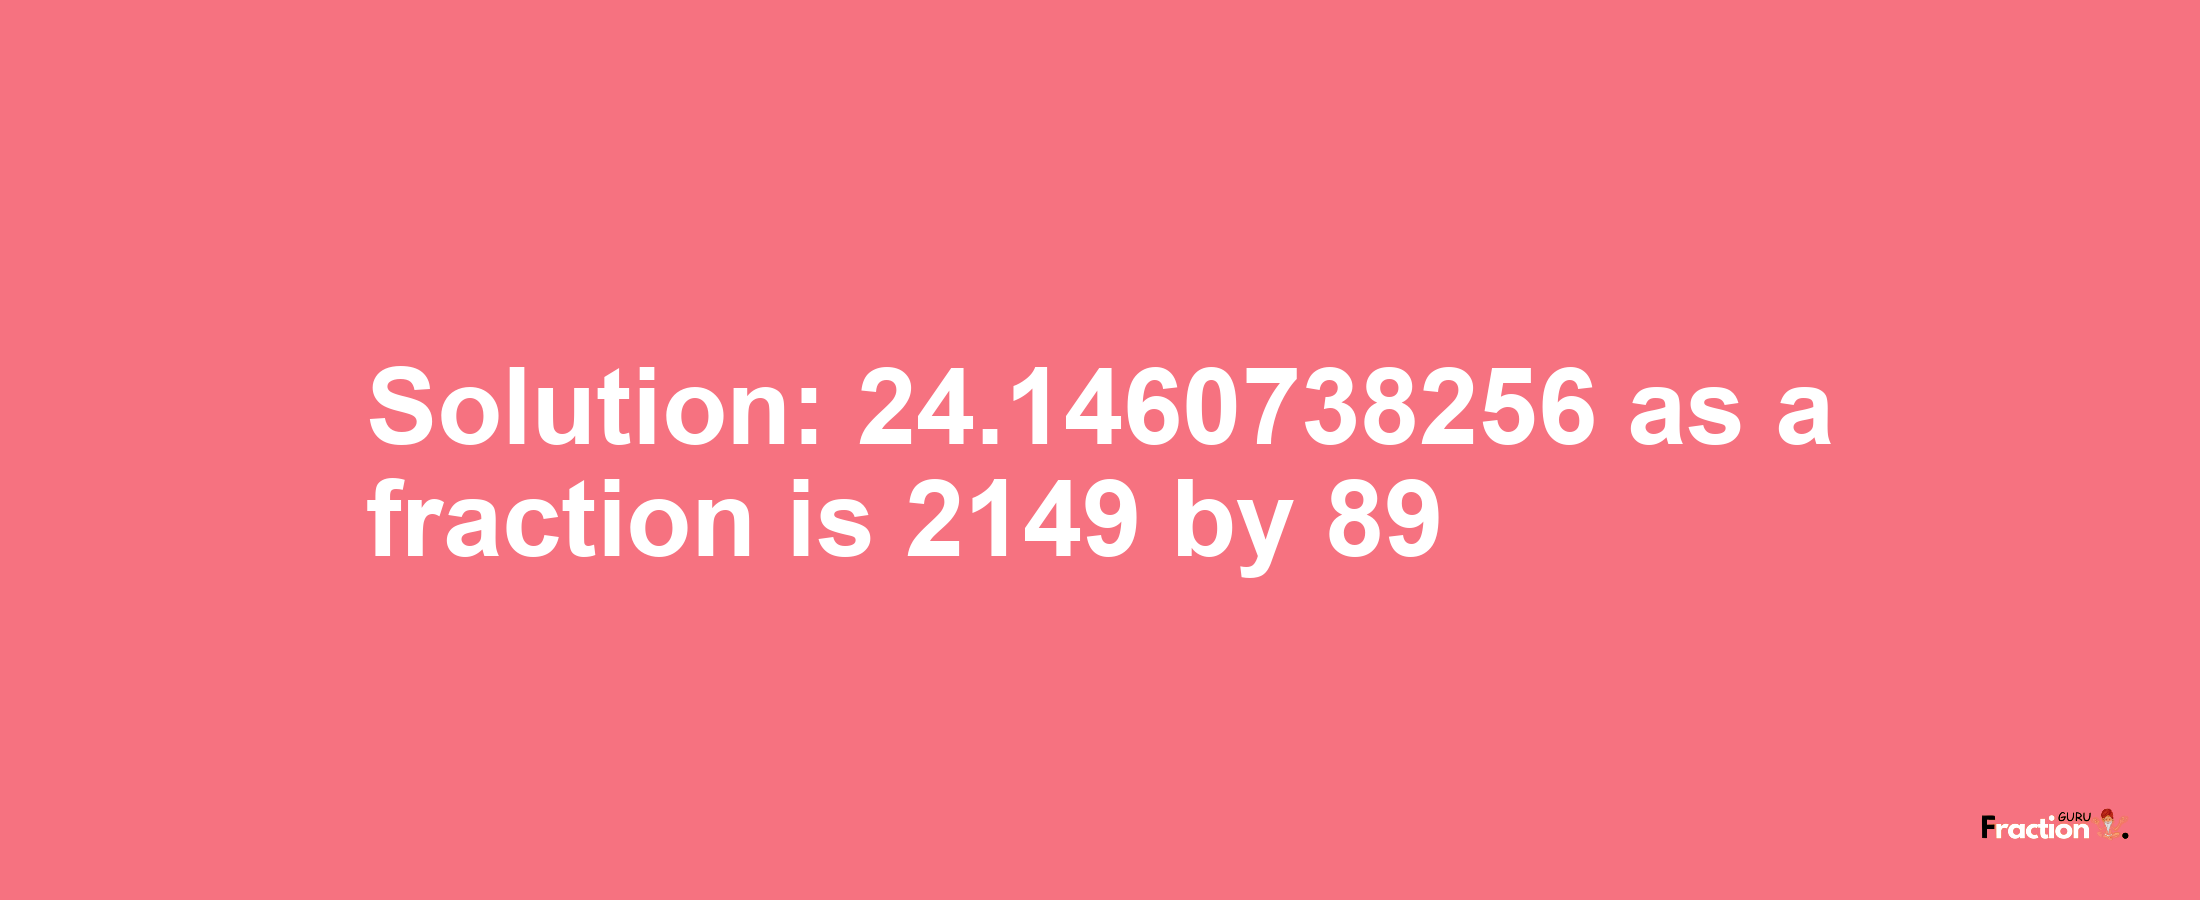 Solution:24.1460738256 as a fraction is 2149/89